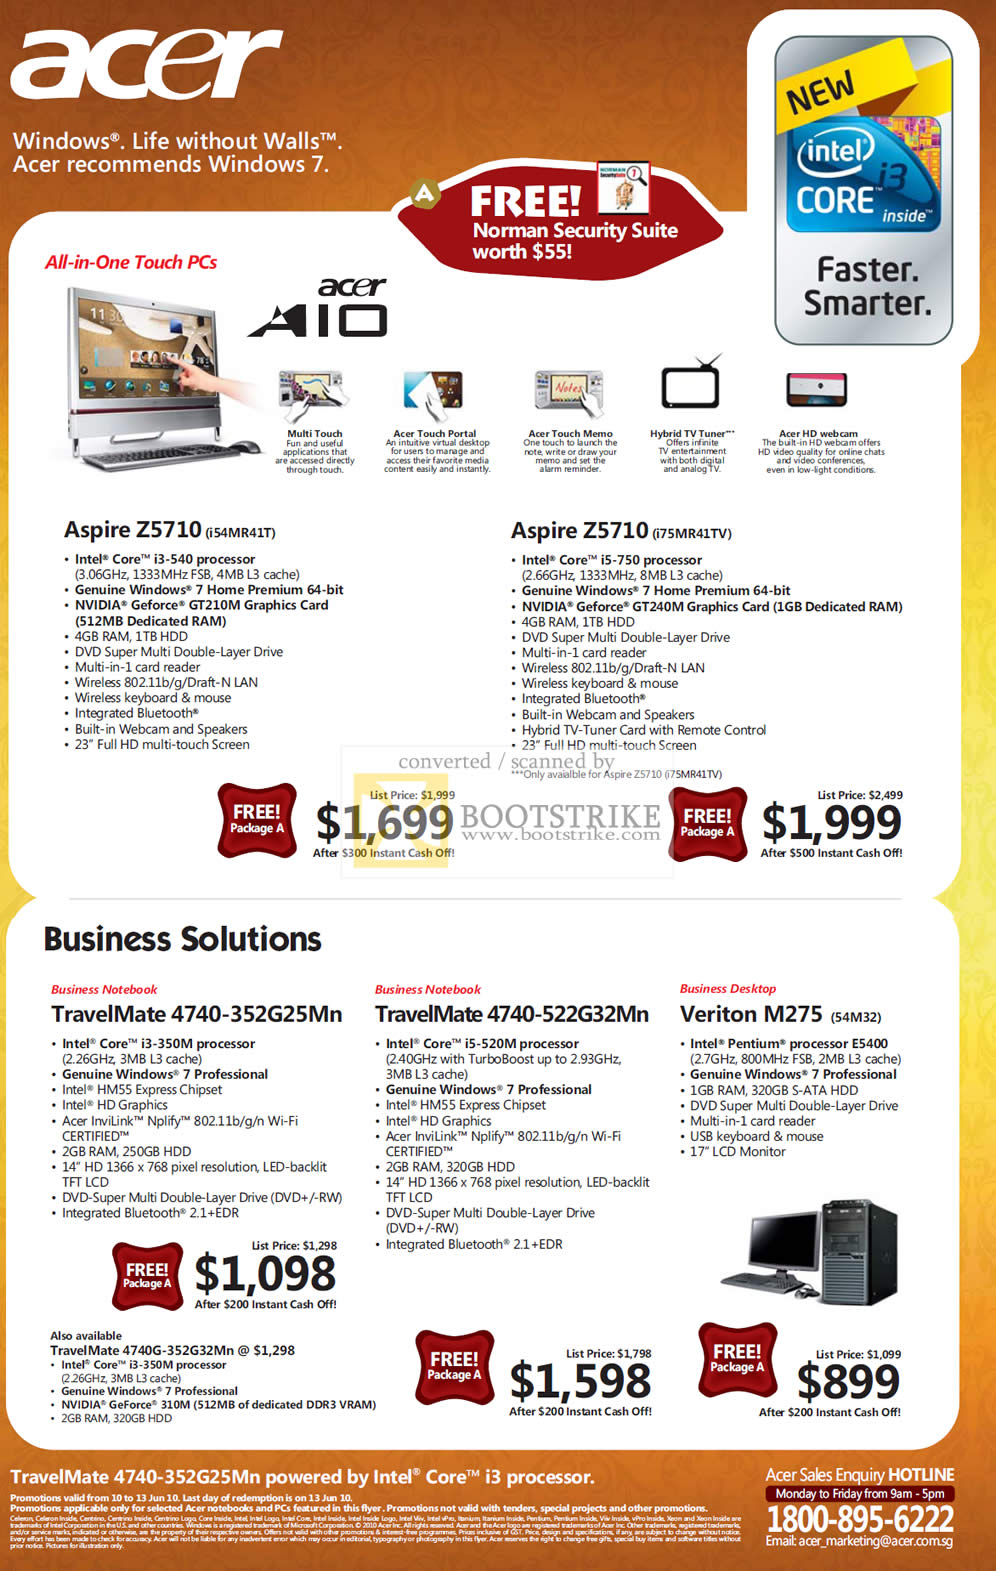 PC Show 2010 price list image brochure of Acer All In One Touch AIO Desktop Aspire Z5710 Business TravelMate 4740 Veriton M275